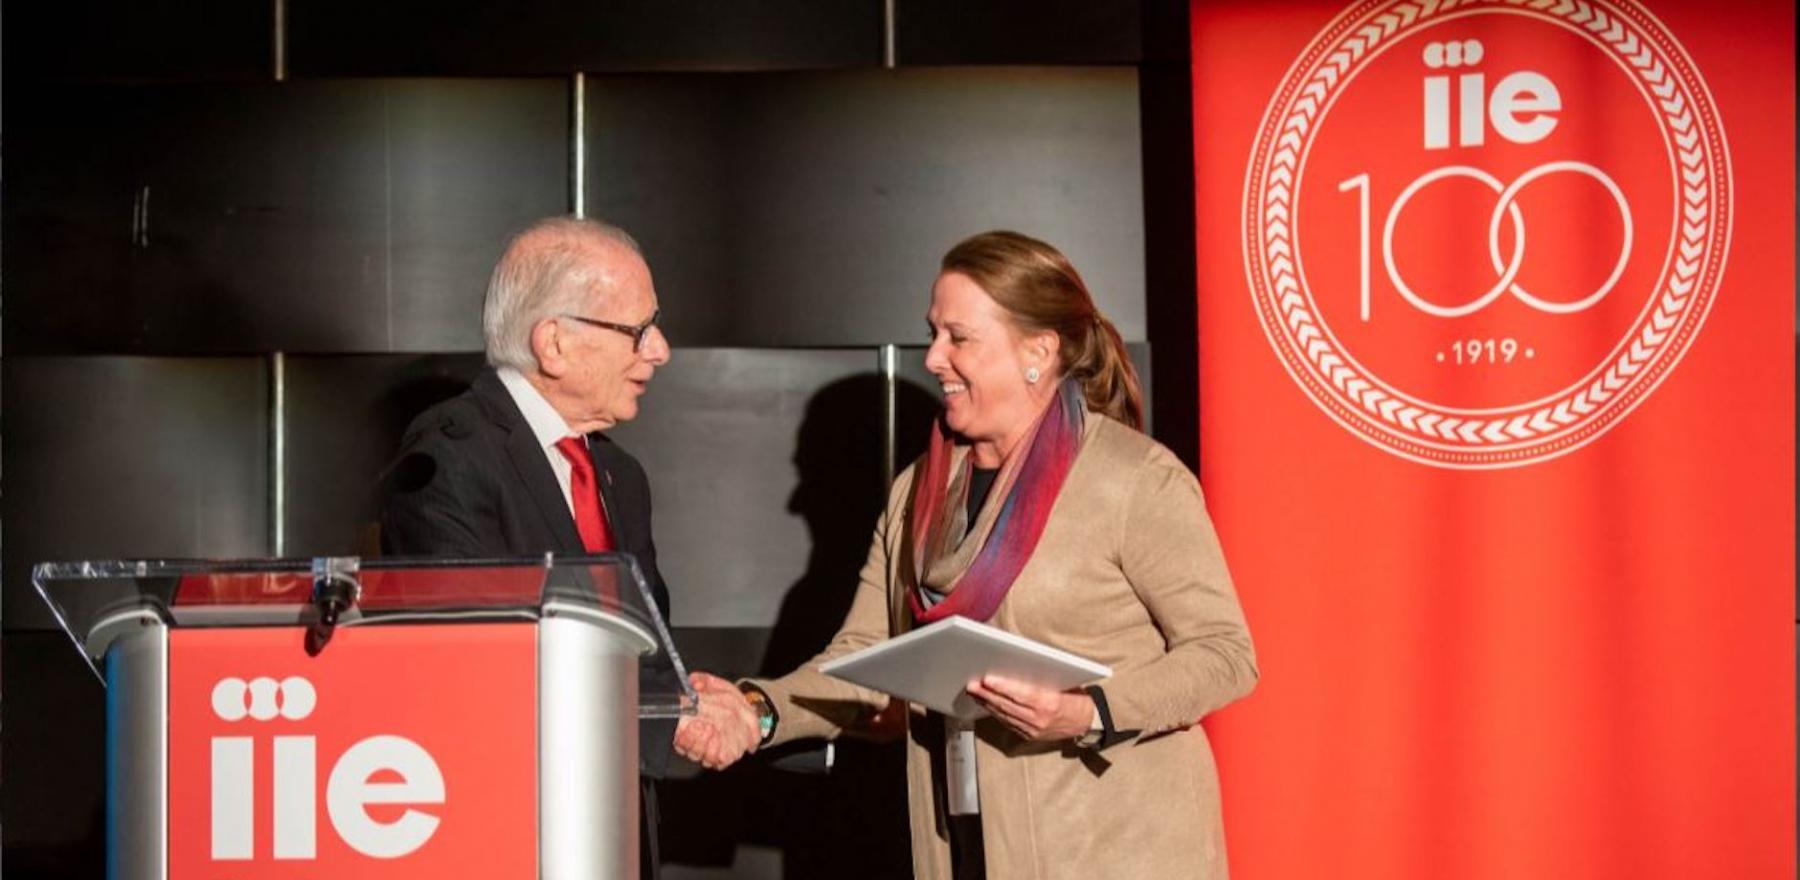 Carol Strange shaking hands at a podium with Allan Goodman, CEO of the Institute of International Education